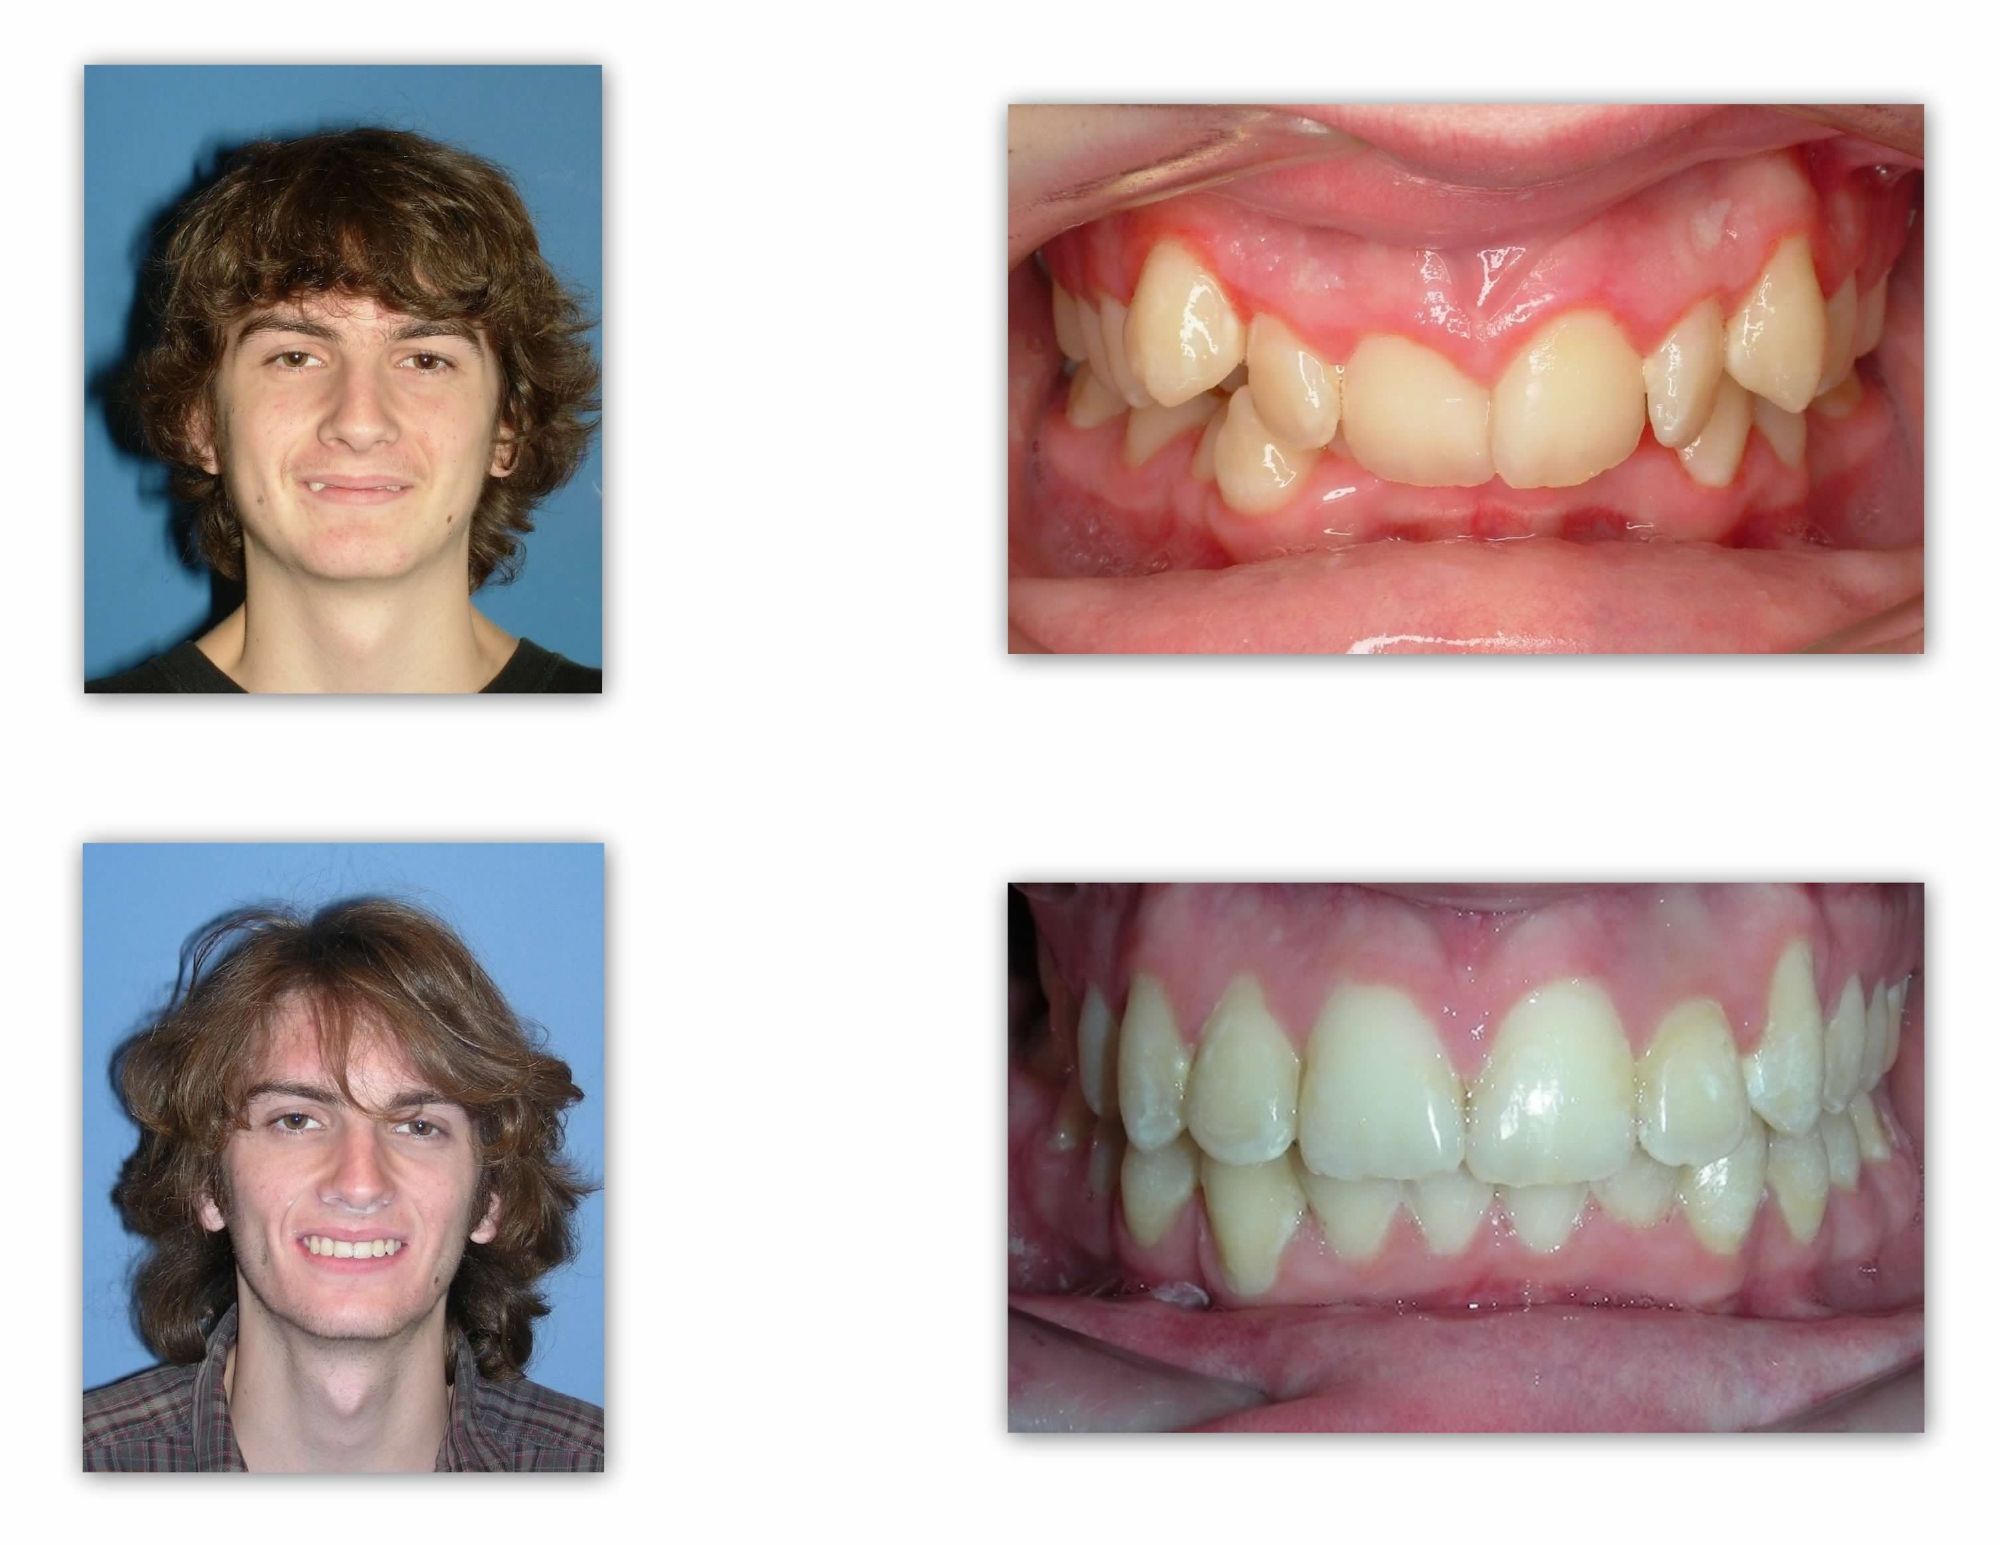 teen smile before and after braces